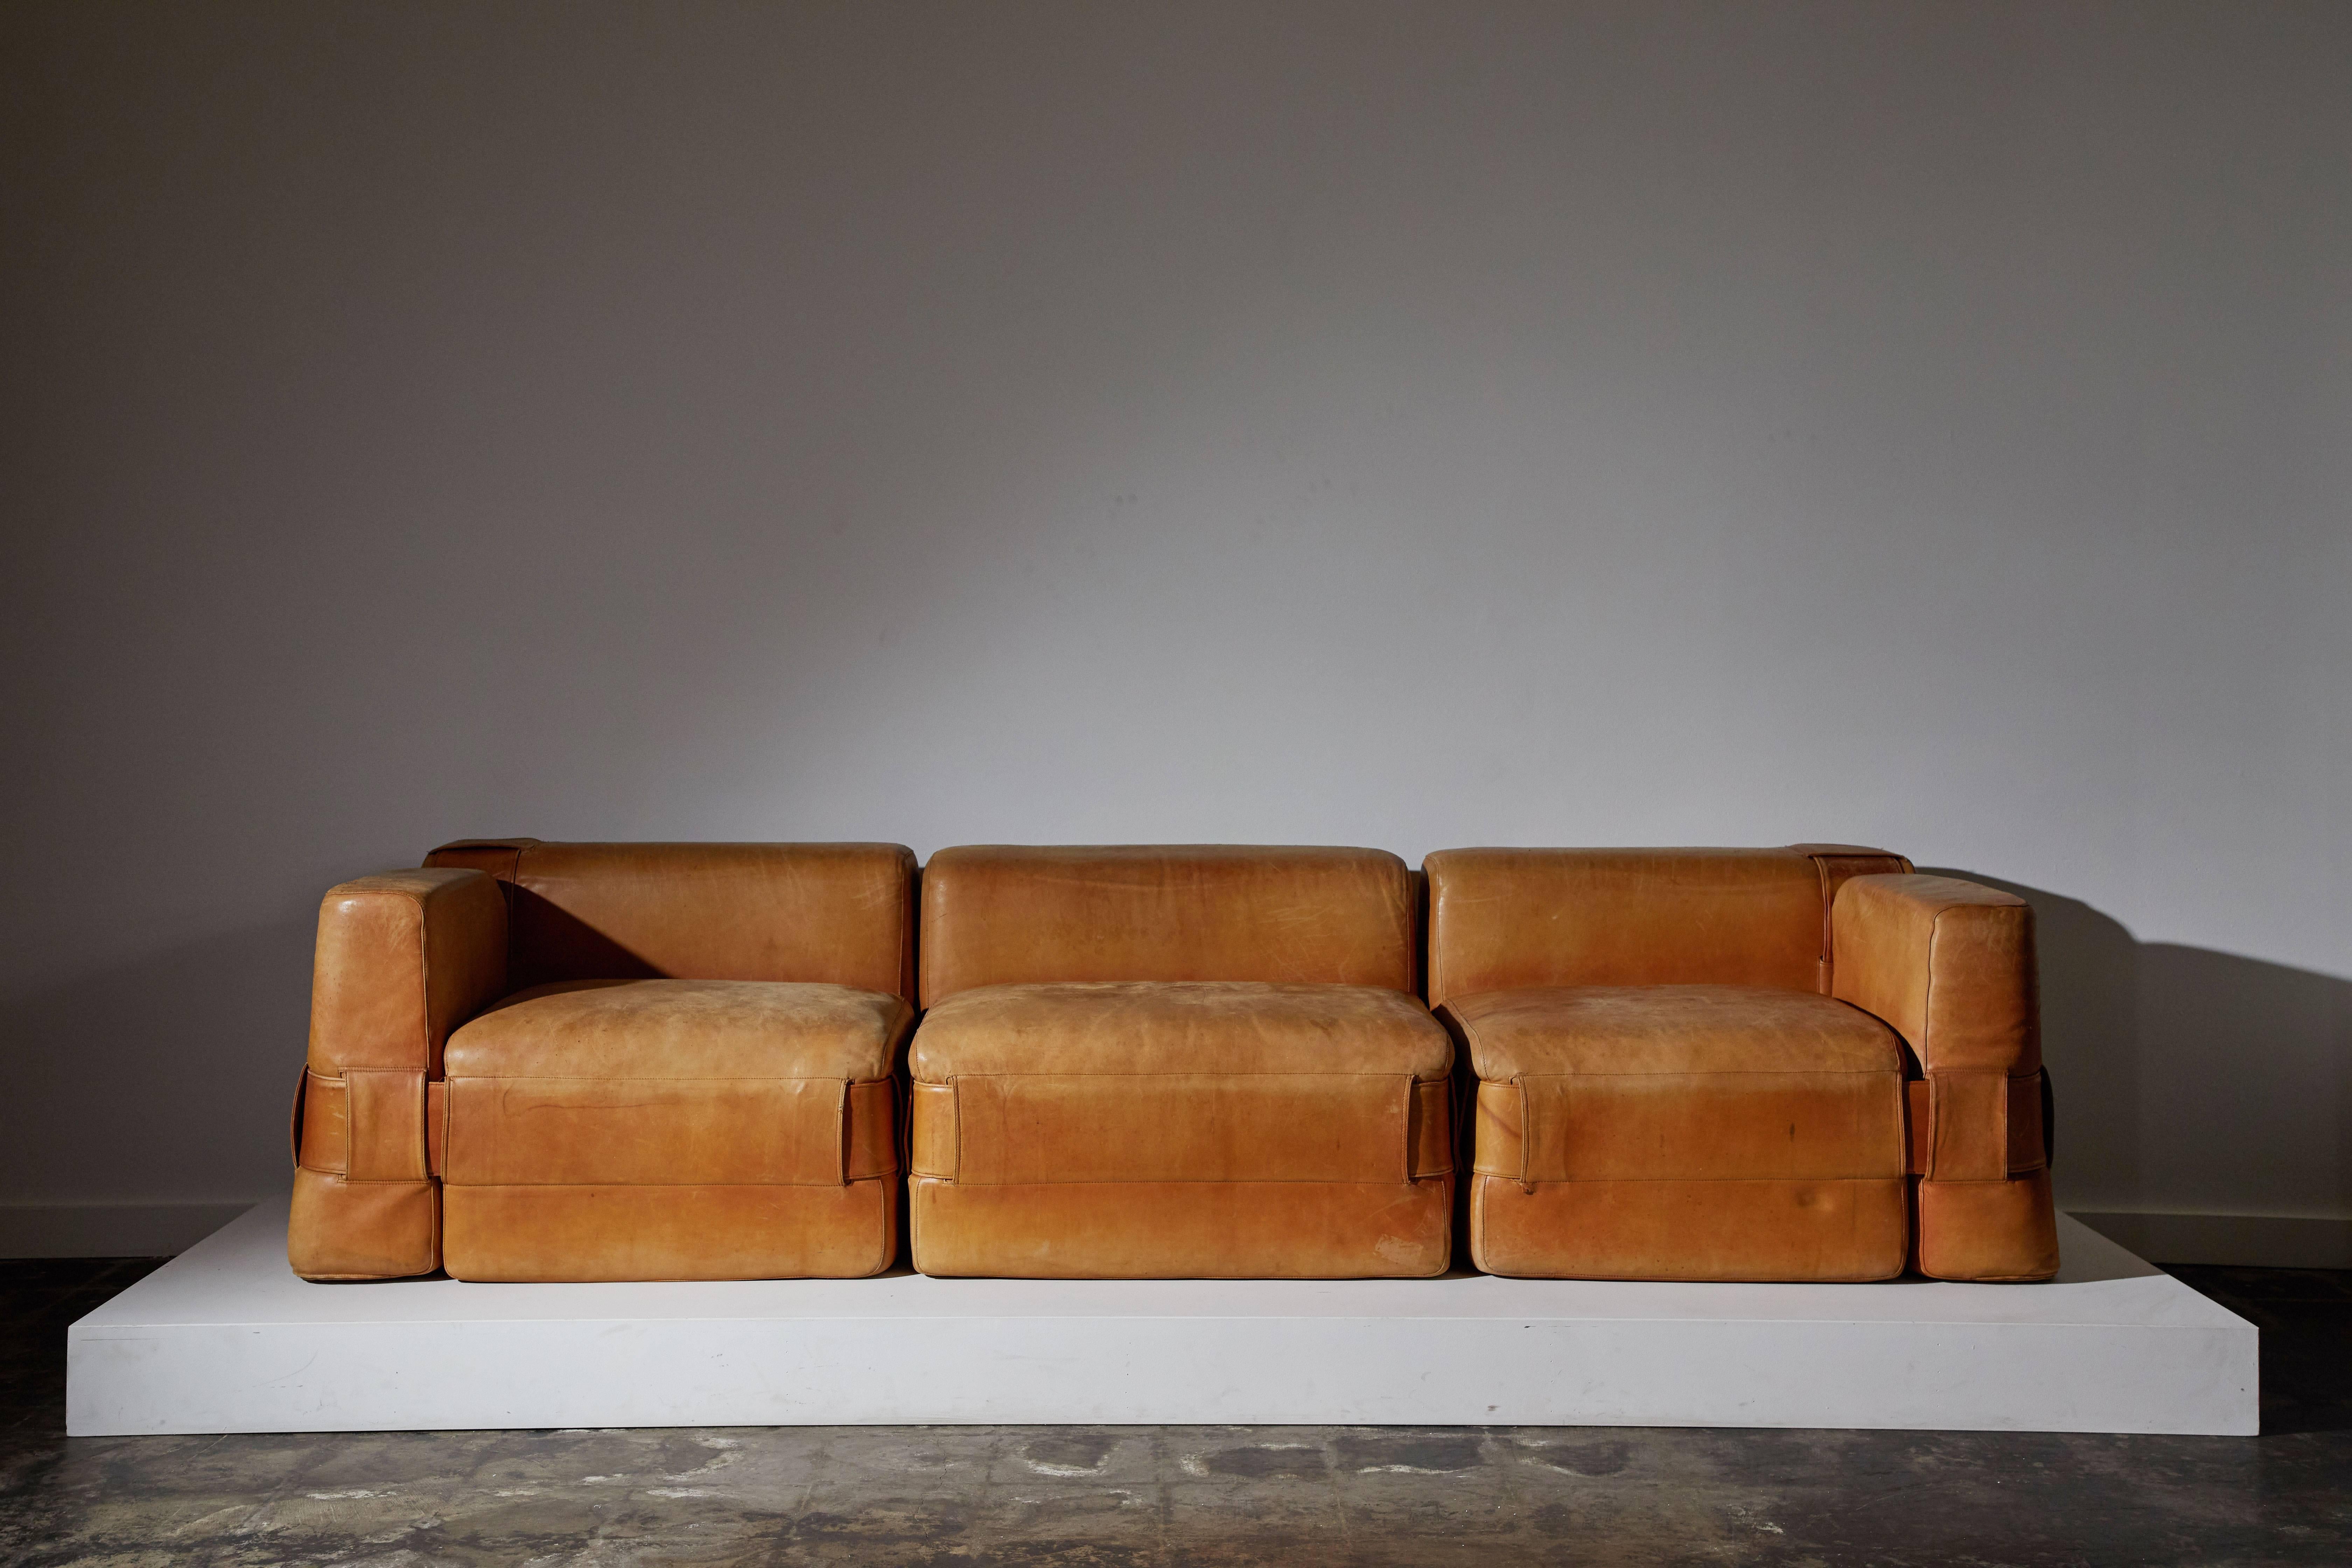 Patinated leather 932 modular sofa range by Mario Bellini for Cassina. Made in Italy circa 1965. 

Armchair also available in separate posting.

